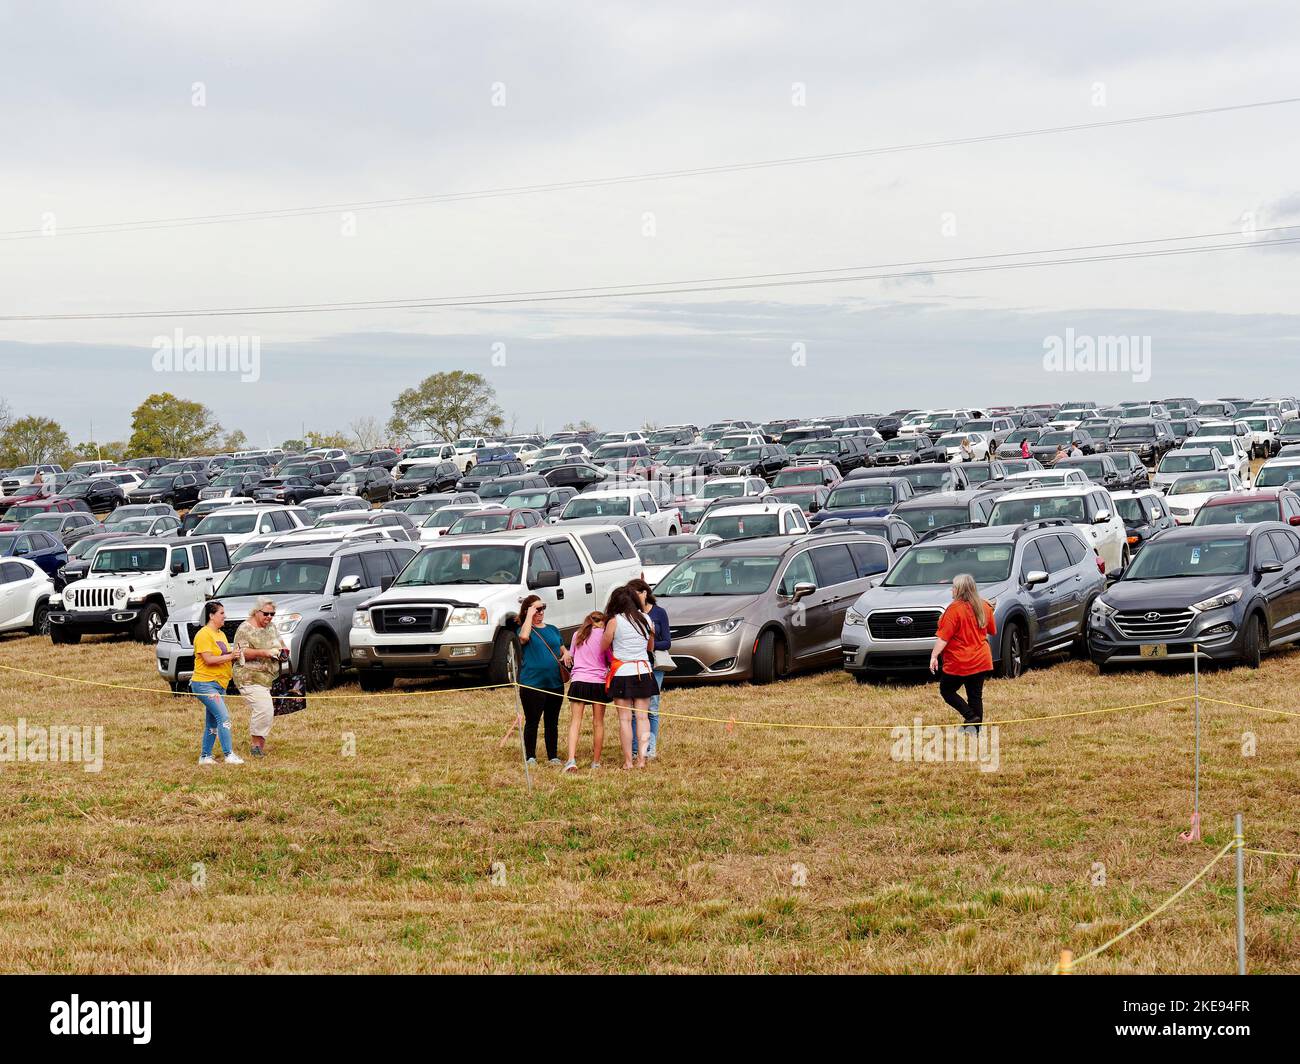 People walking from rows of parked cars and SUV's in a grass field at a local arts and crafts fair in Pike Road Alabama, USA. Stock Photo